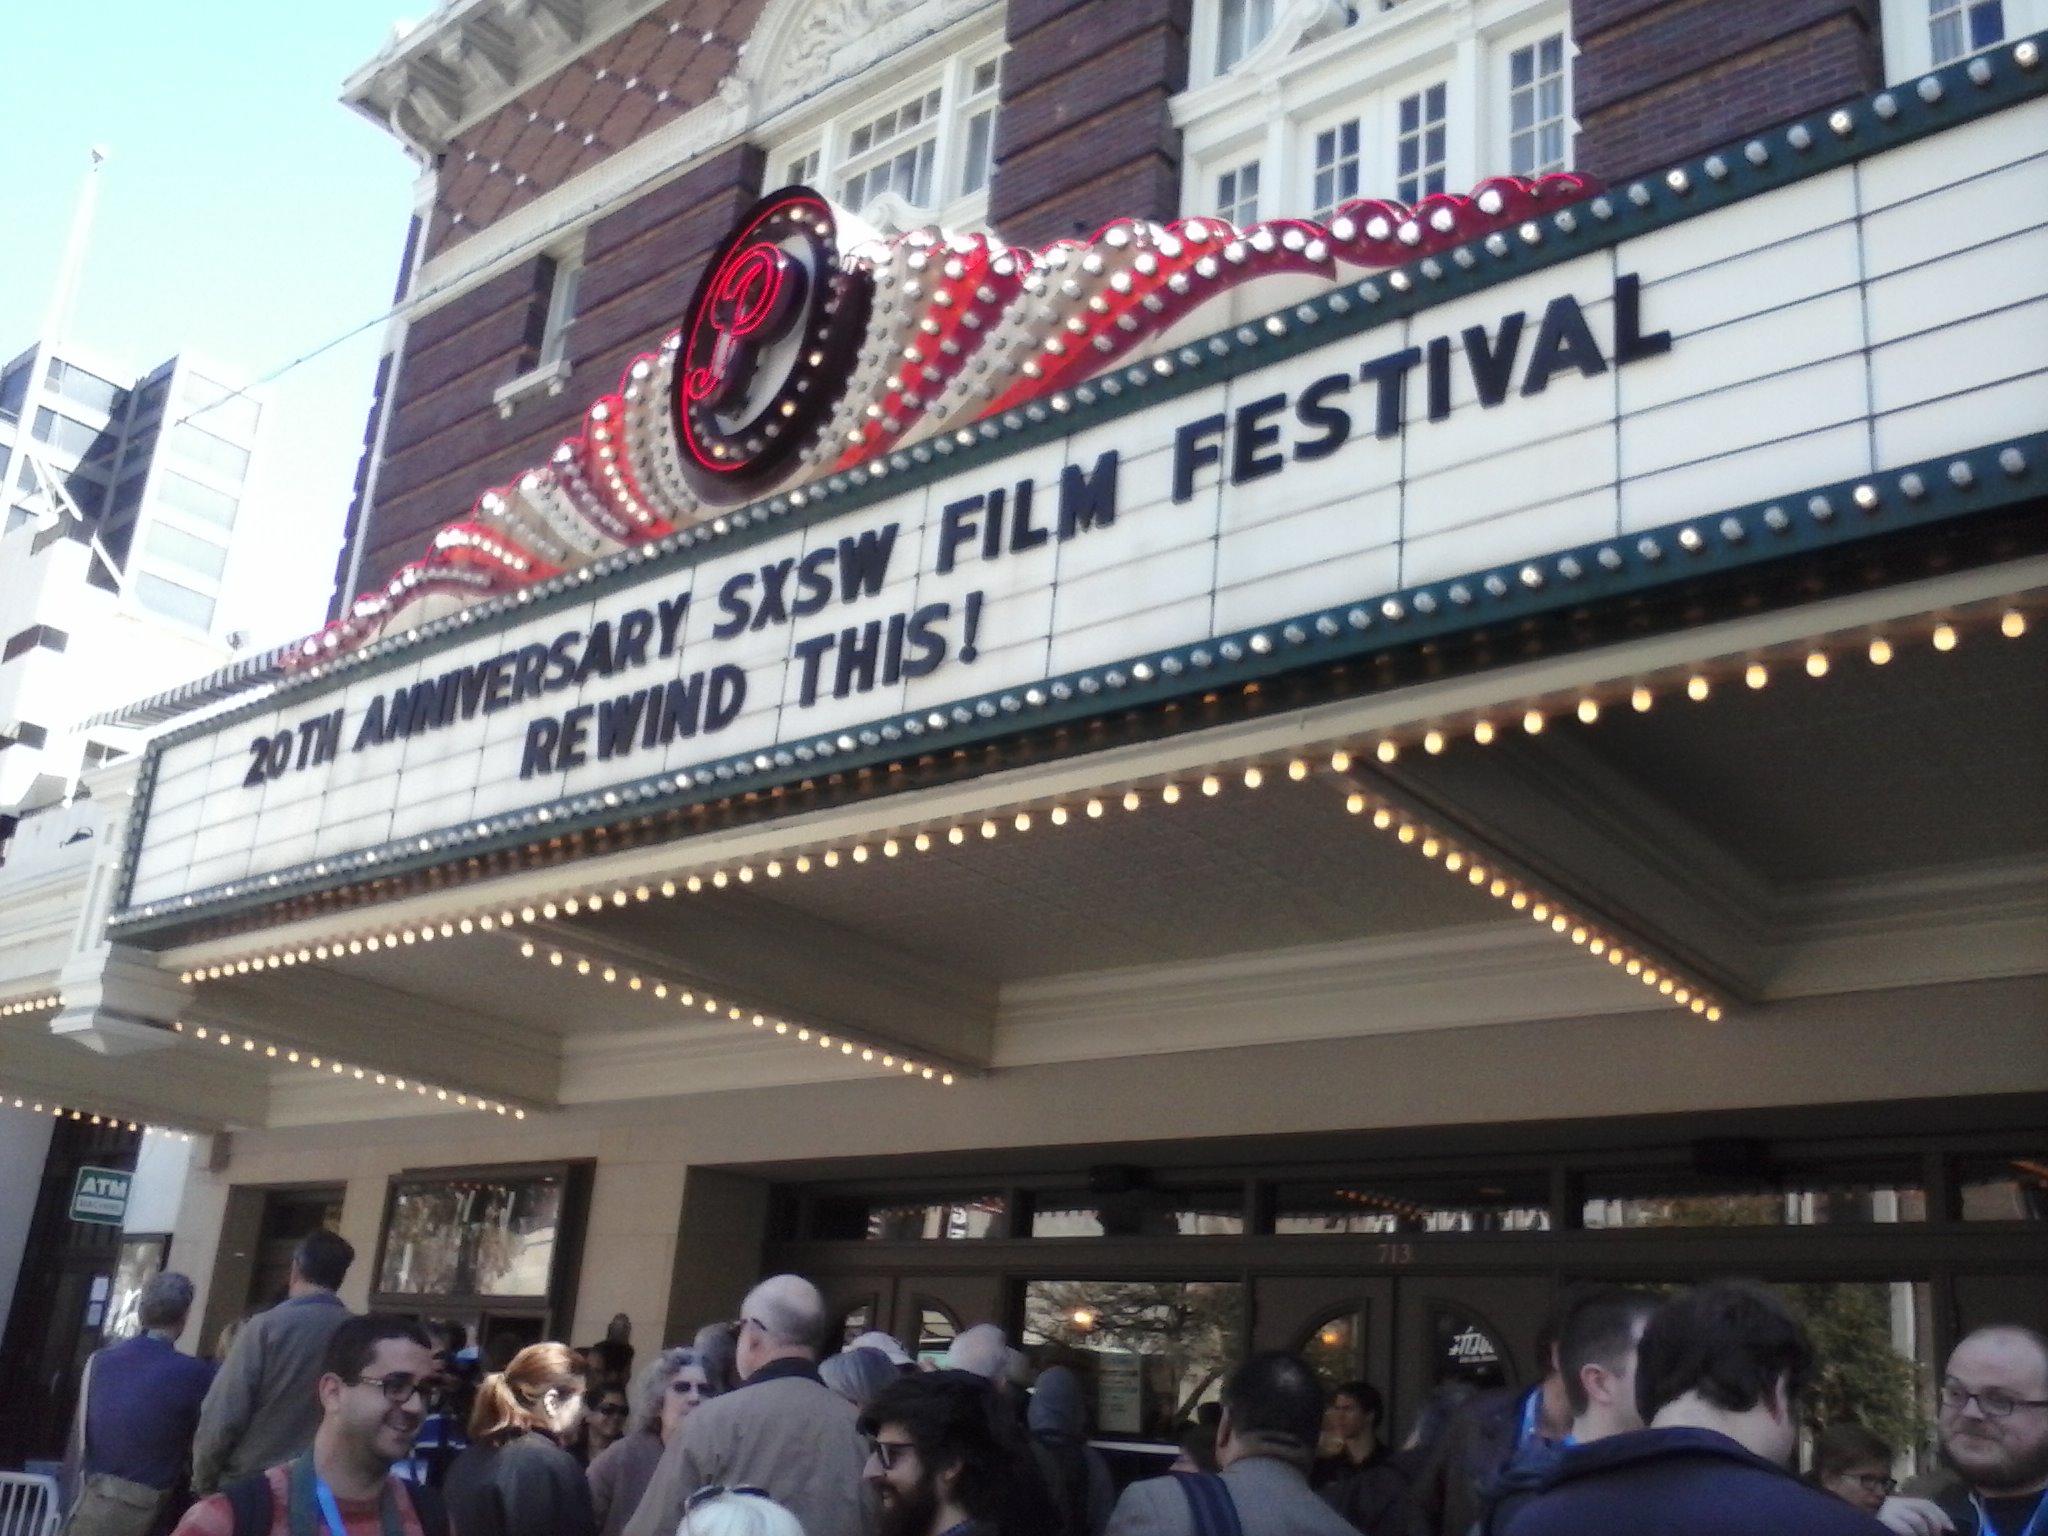 What a way to World Premiere a new movie! SXSW 2013 at the Paramount Theater.